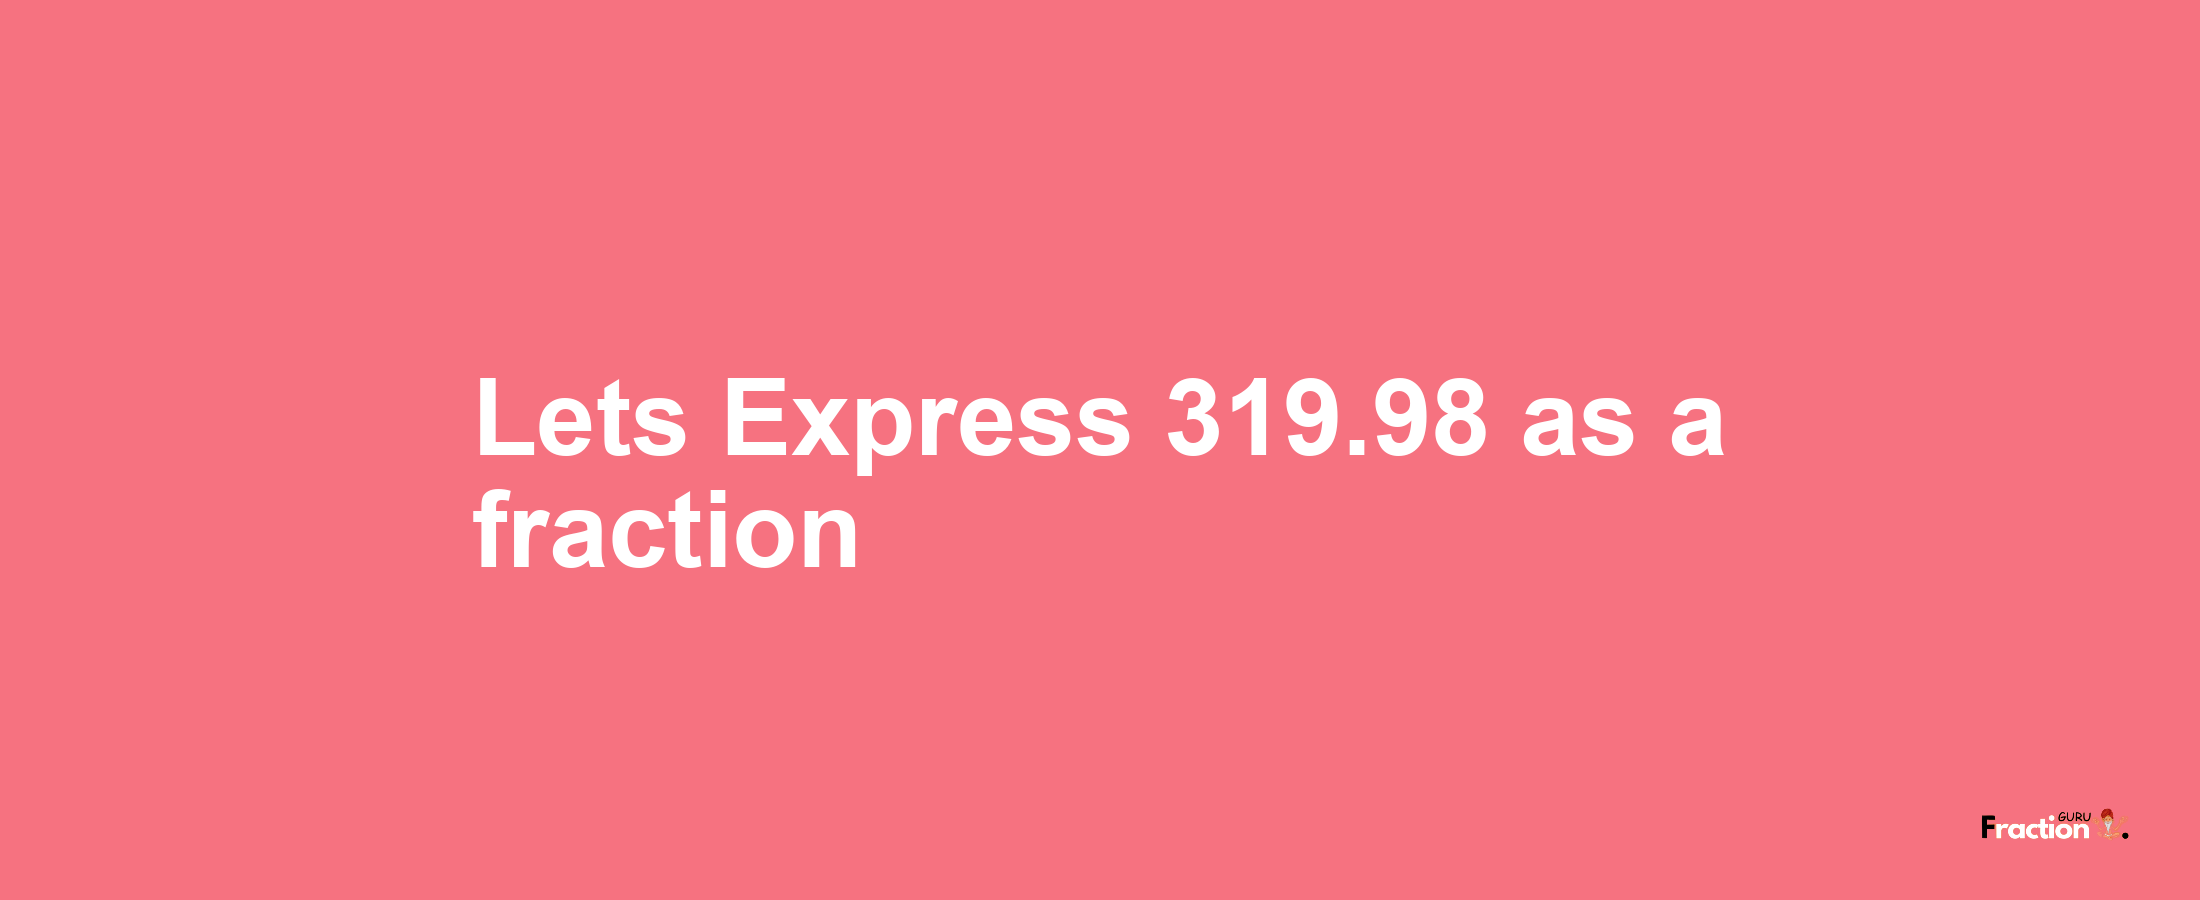 Lets Express 319.98 as afraction